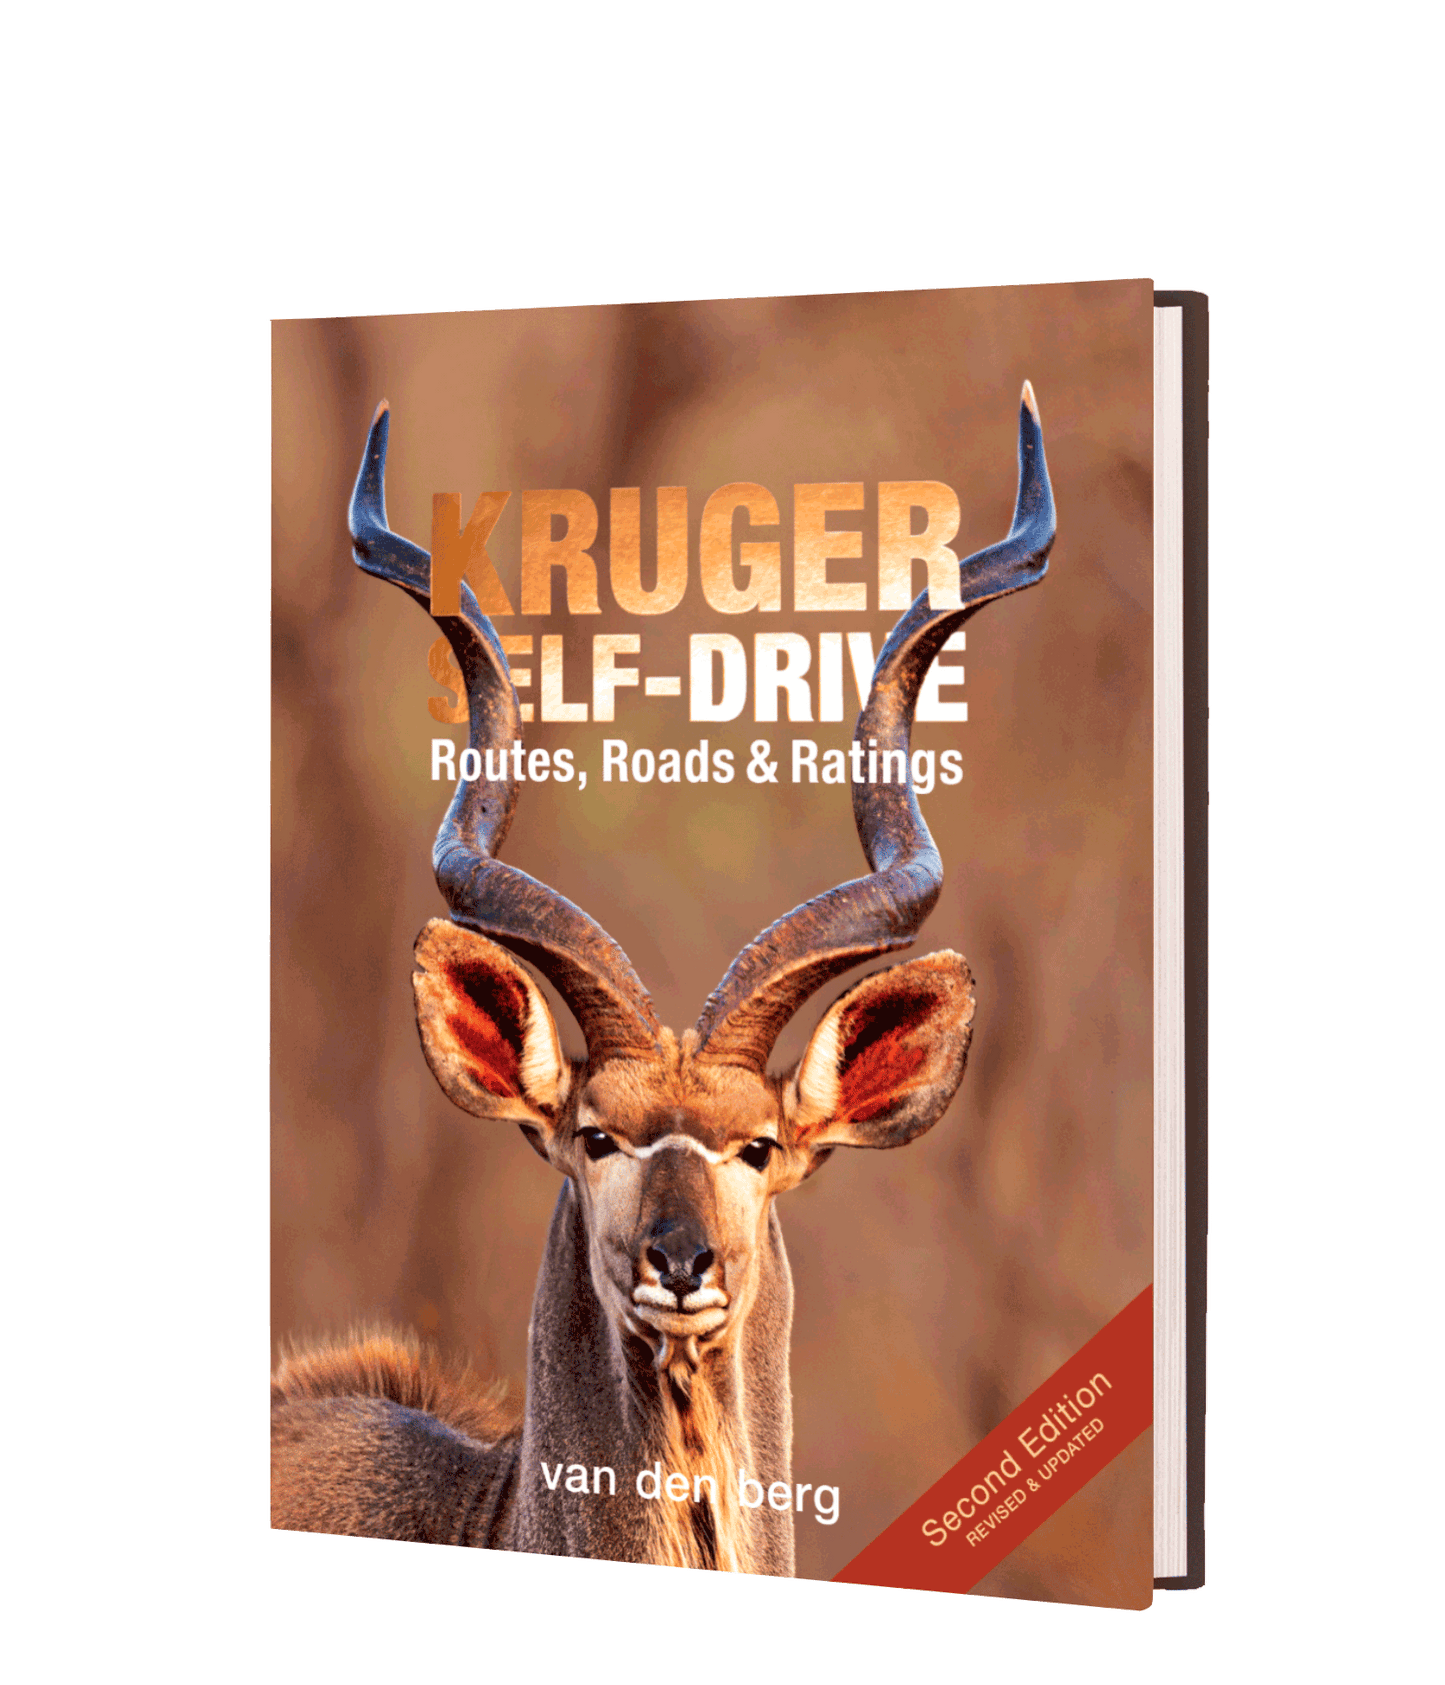 Kruger Self-Drive – Second Edition